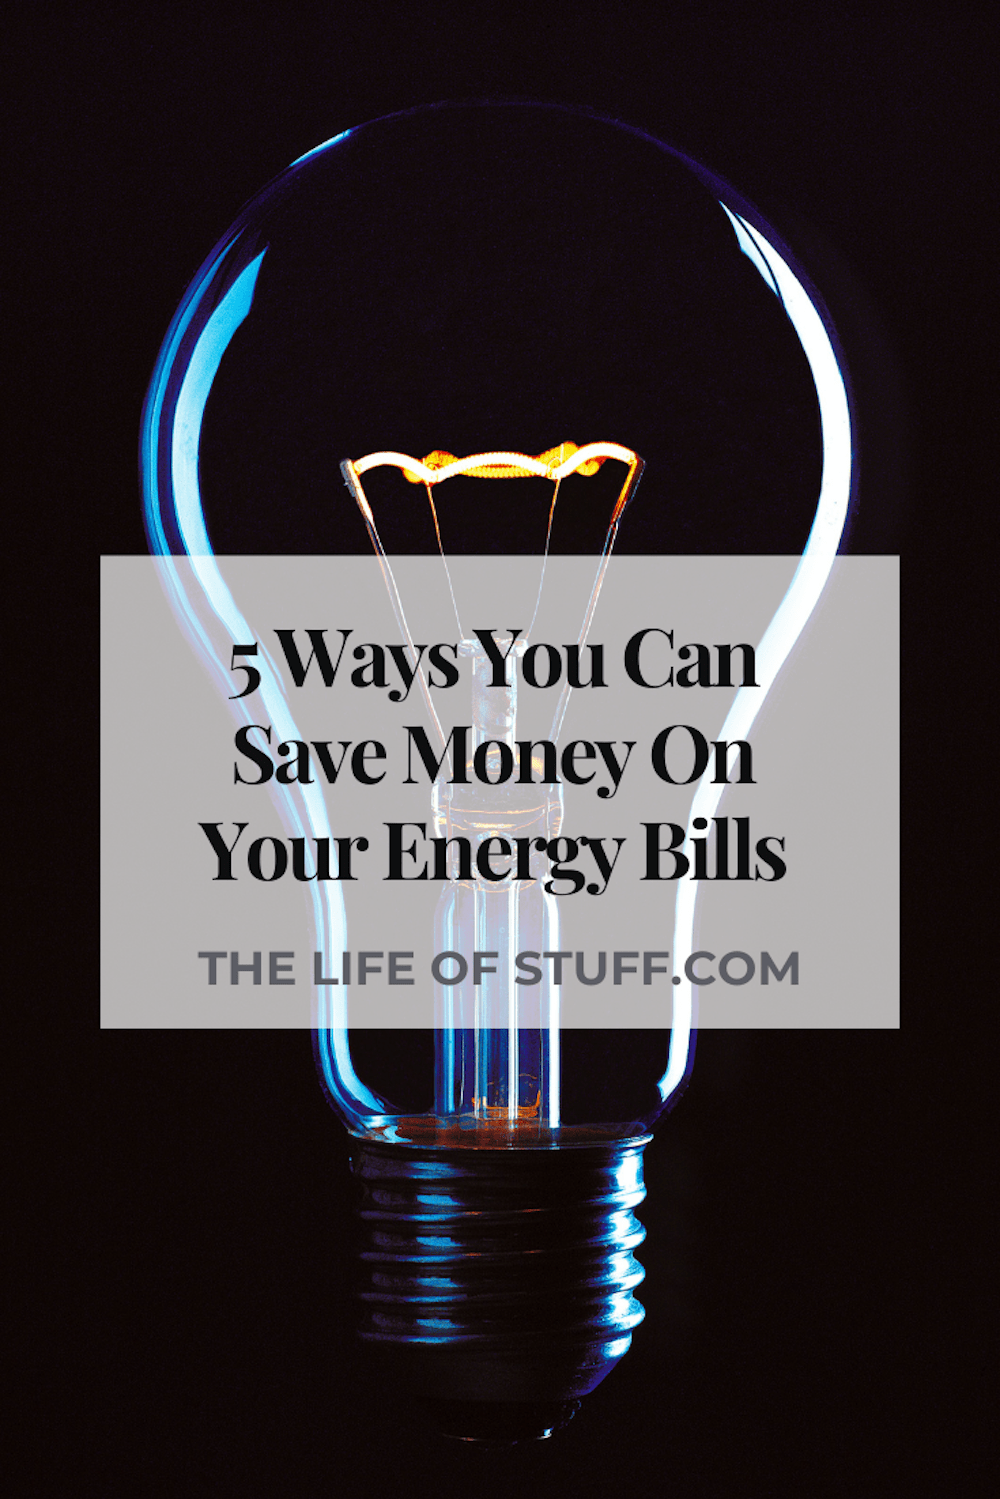 5 Ways You Can Save Money On Your Energy Bills - The Life of Stuff